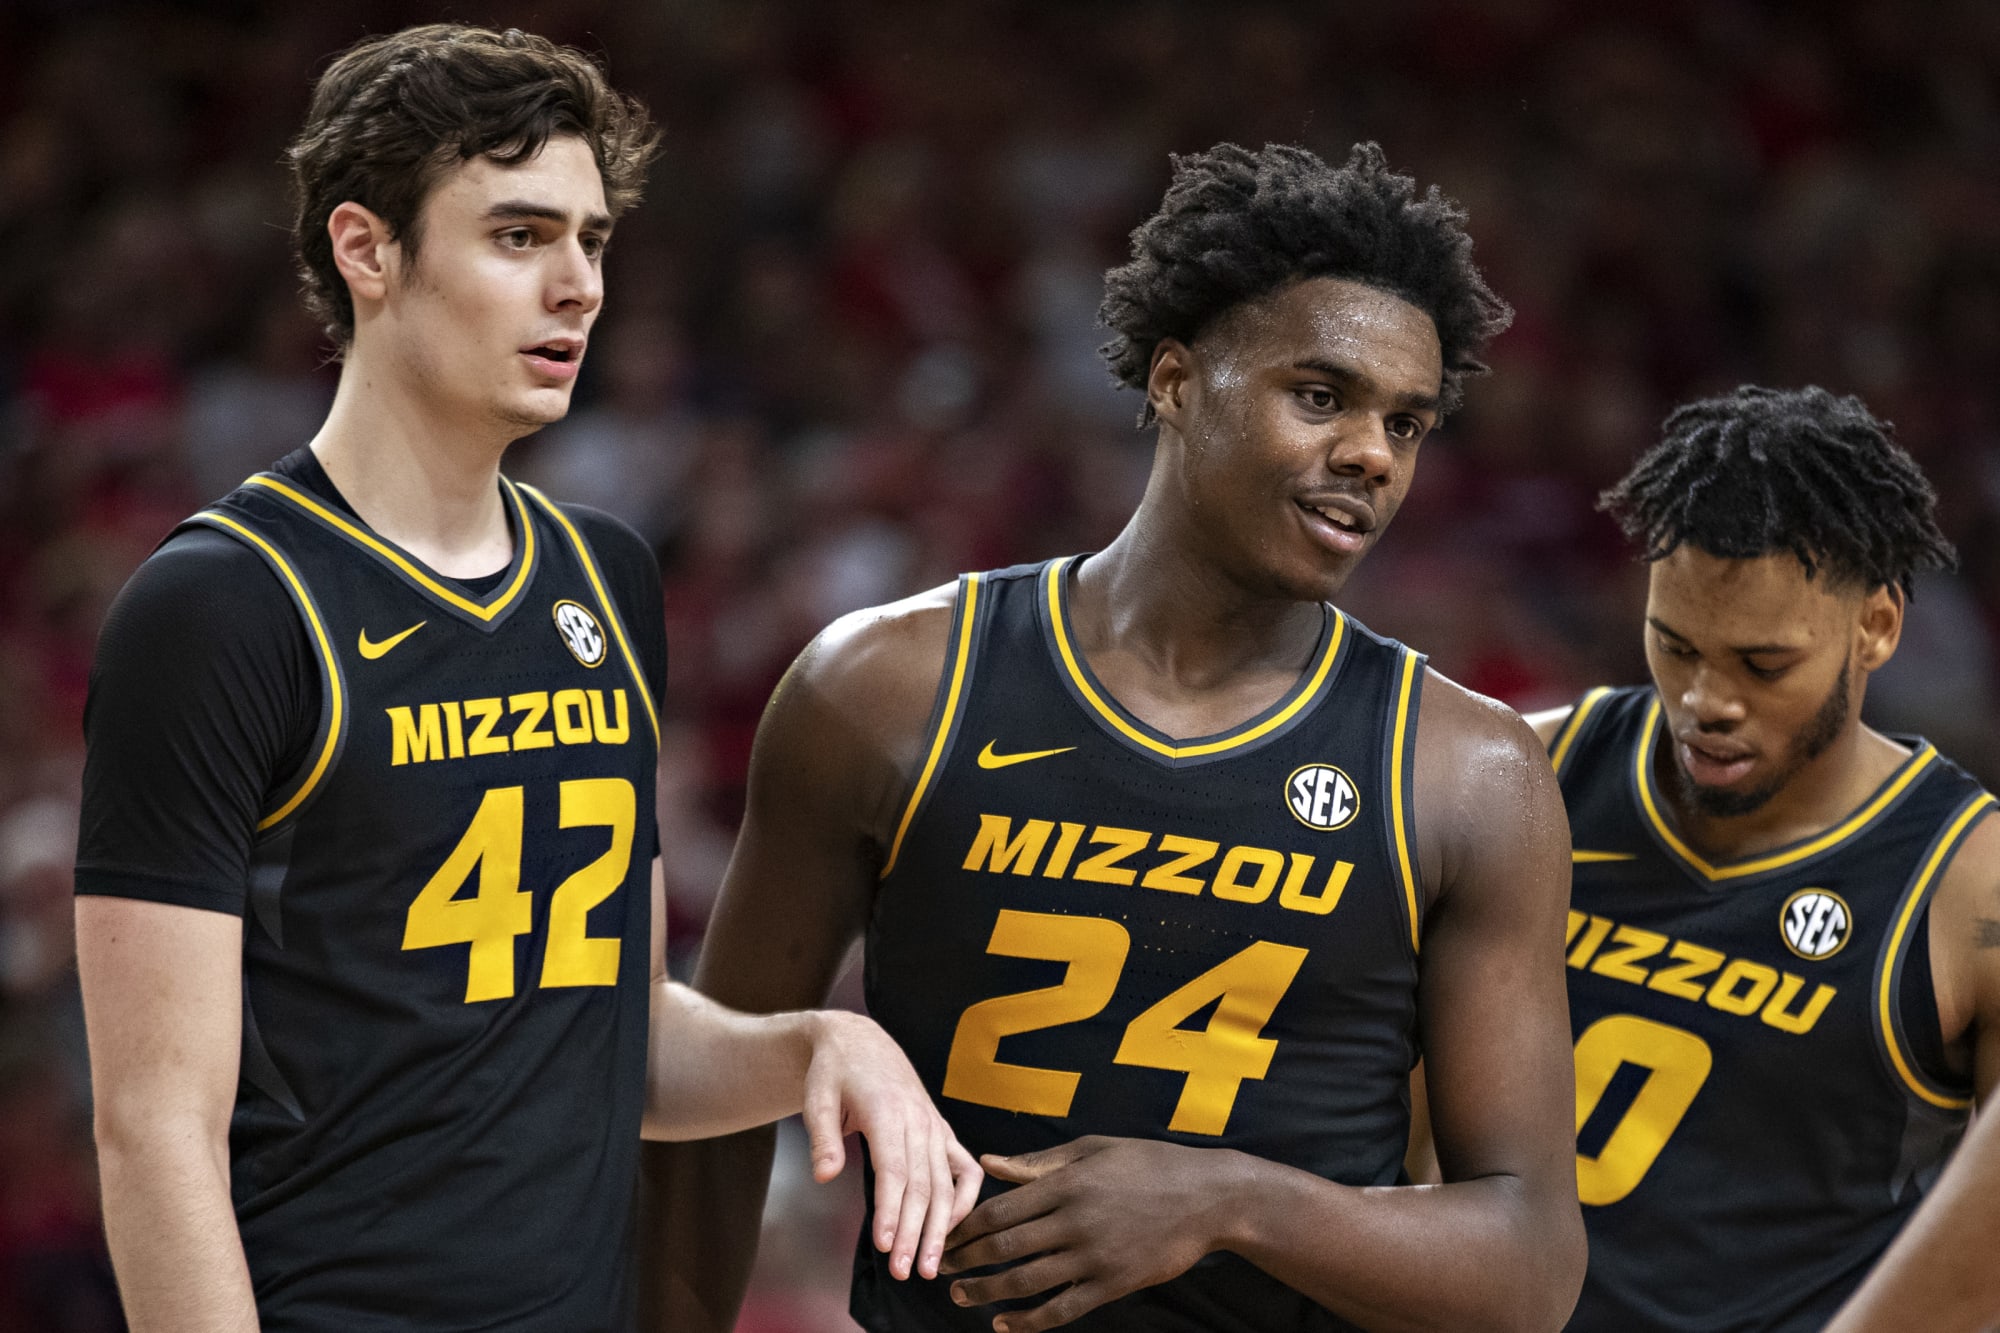 Missouri Basketball Can Tigers be a threat in 2021 NCAA tournament?